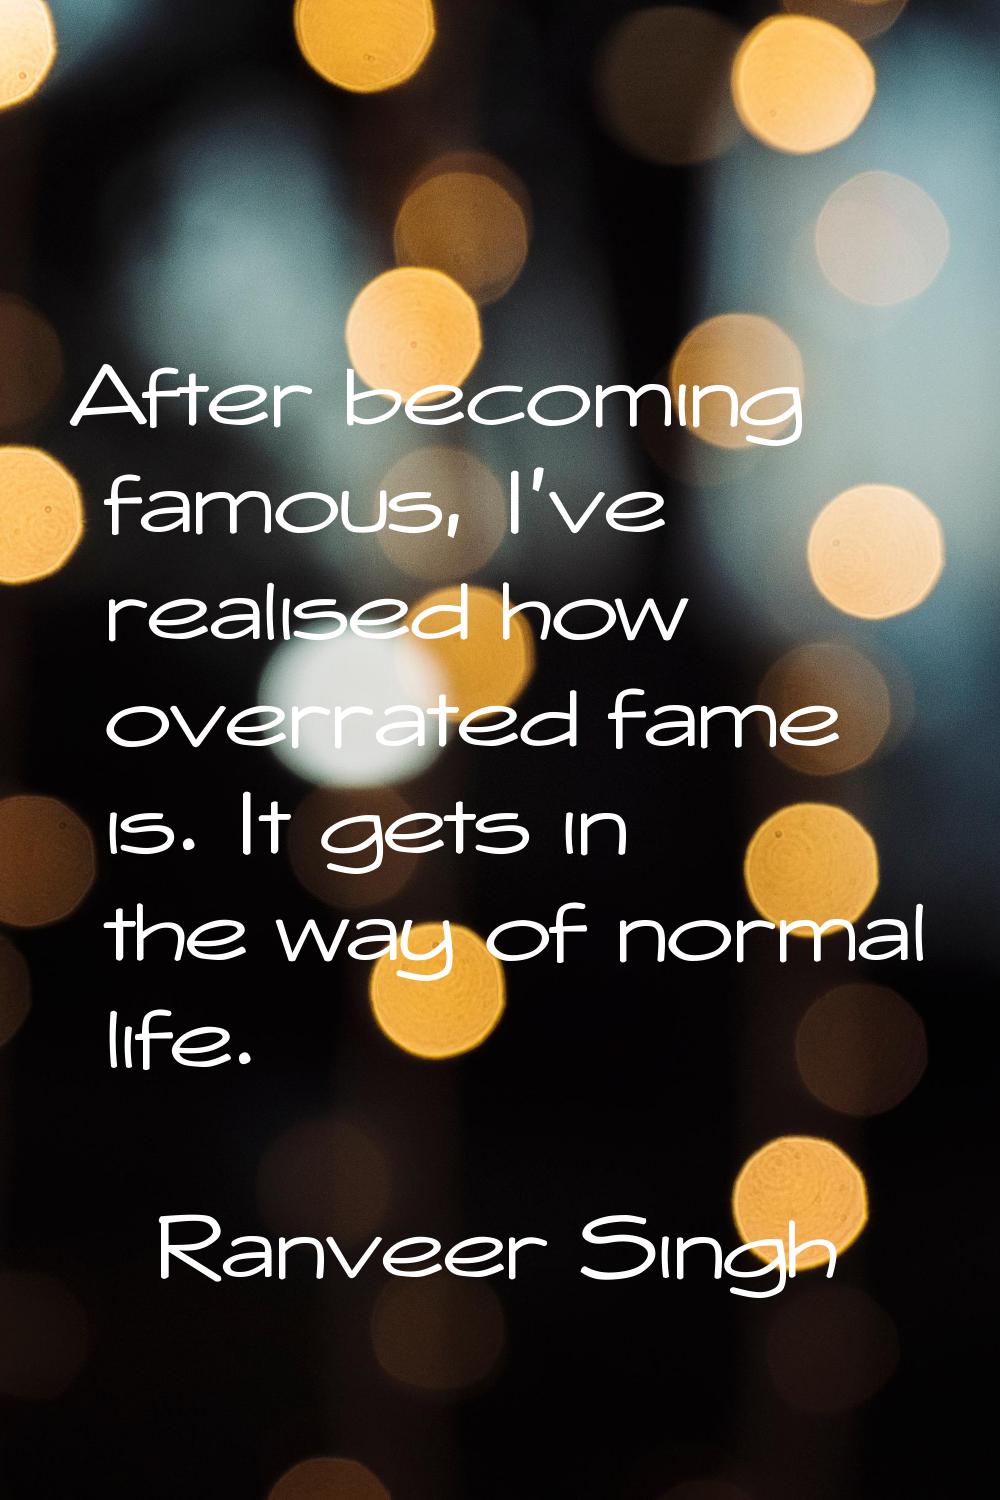 After becoming famous, I've realised how overrated fame is. It gets in the way of normal life.